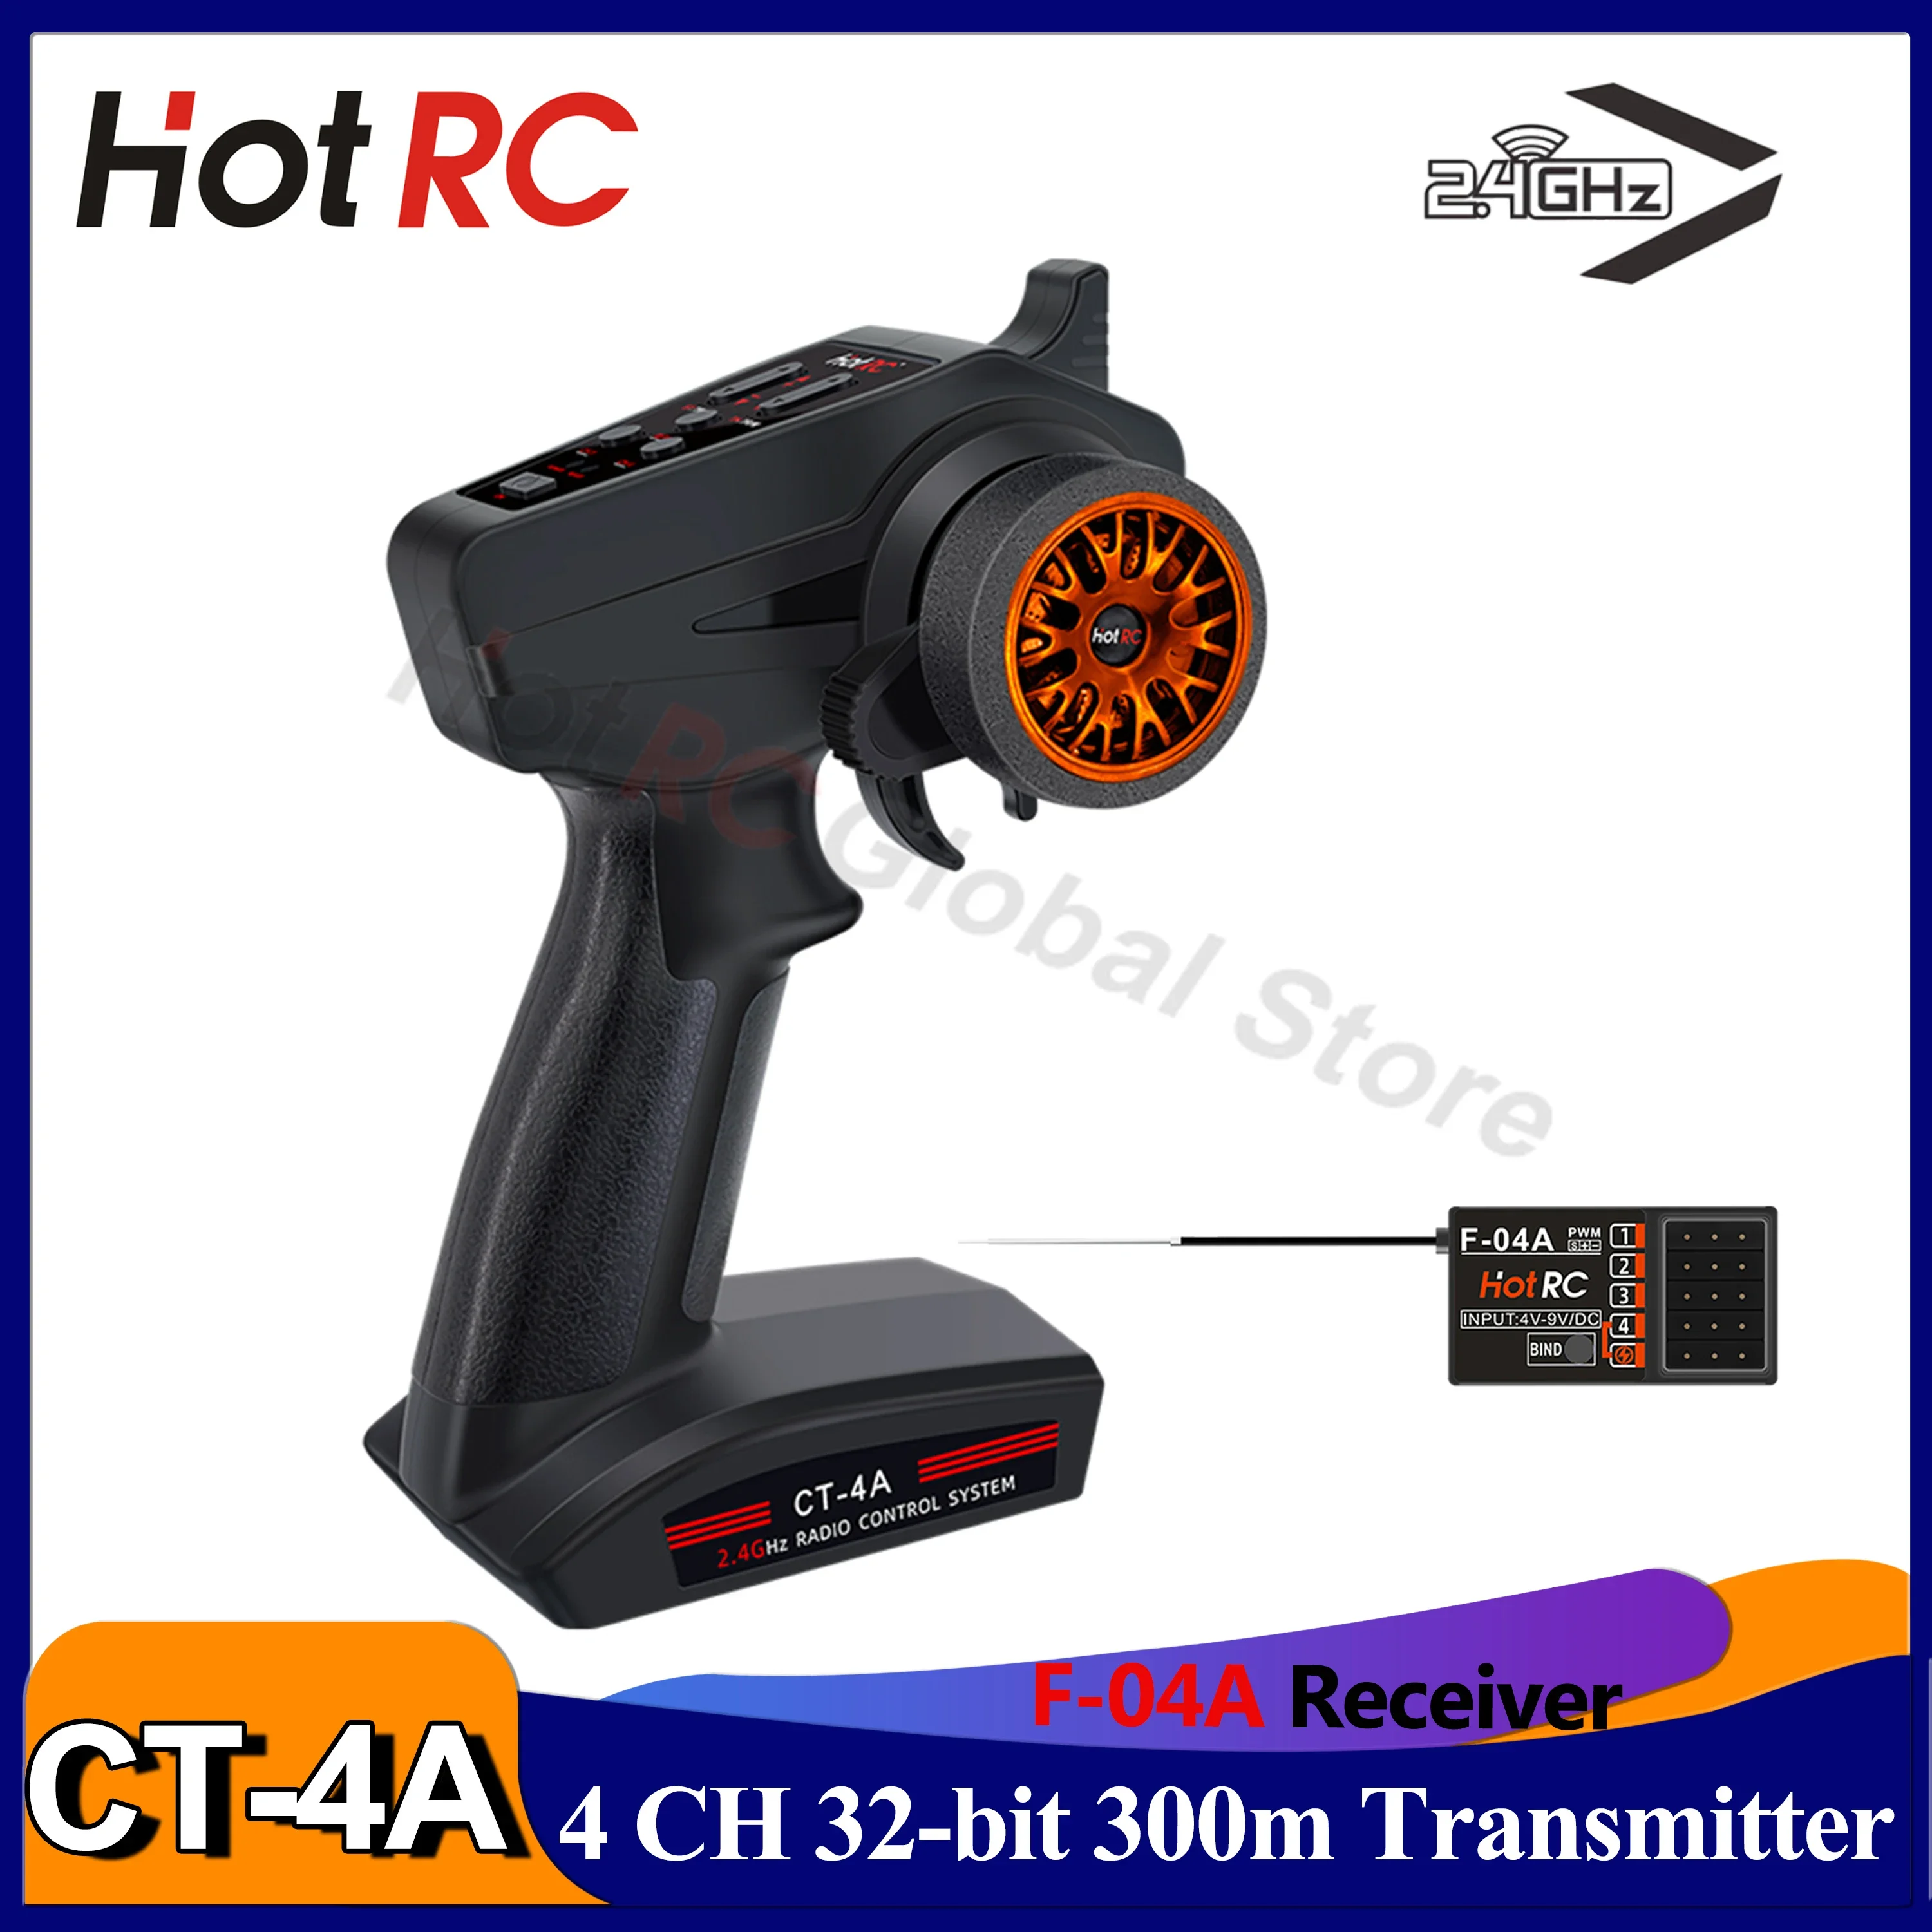 

HOTRC CT-4A 4CH Radio Control 2.4GHZ FHSS System Transmitter 300m Distance 2S 4V-9V with F-04A Receiver For RC Car Boat